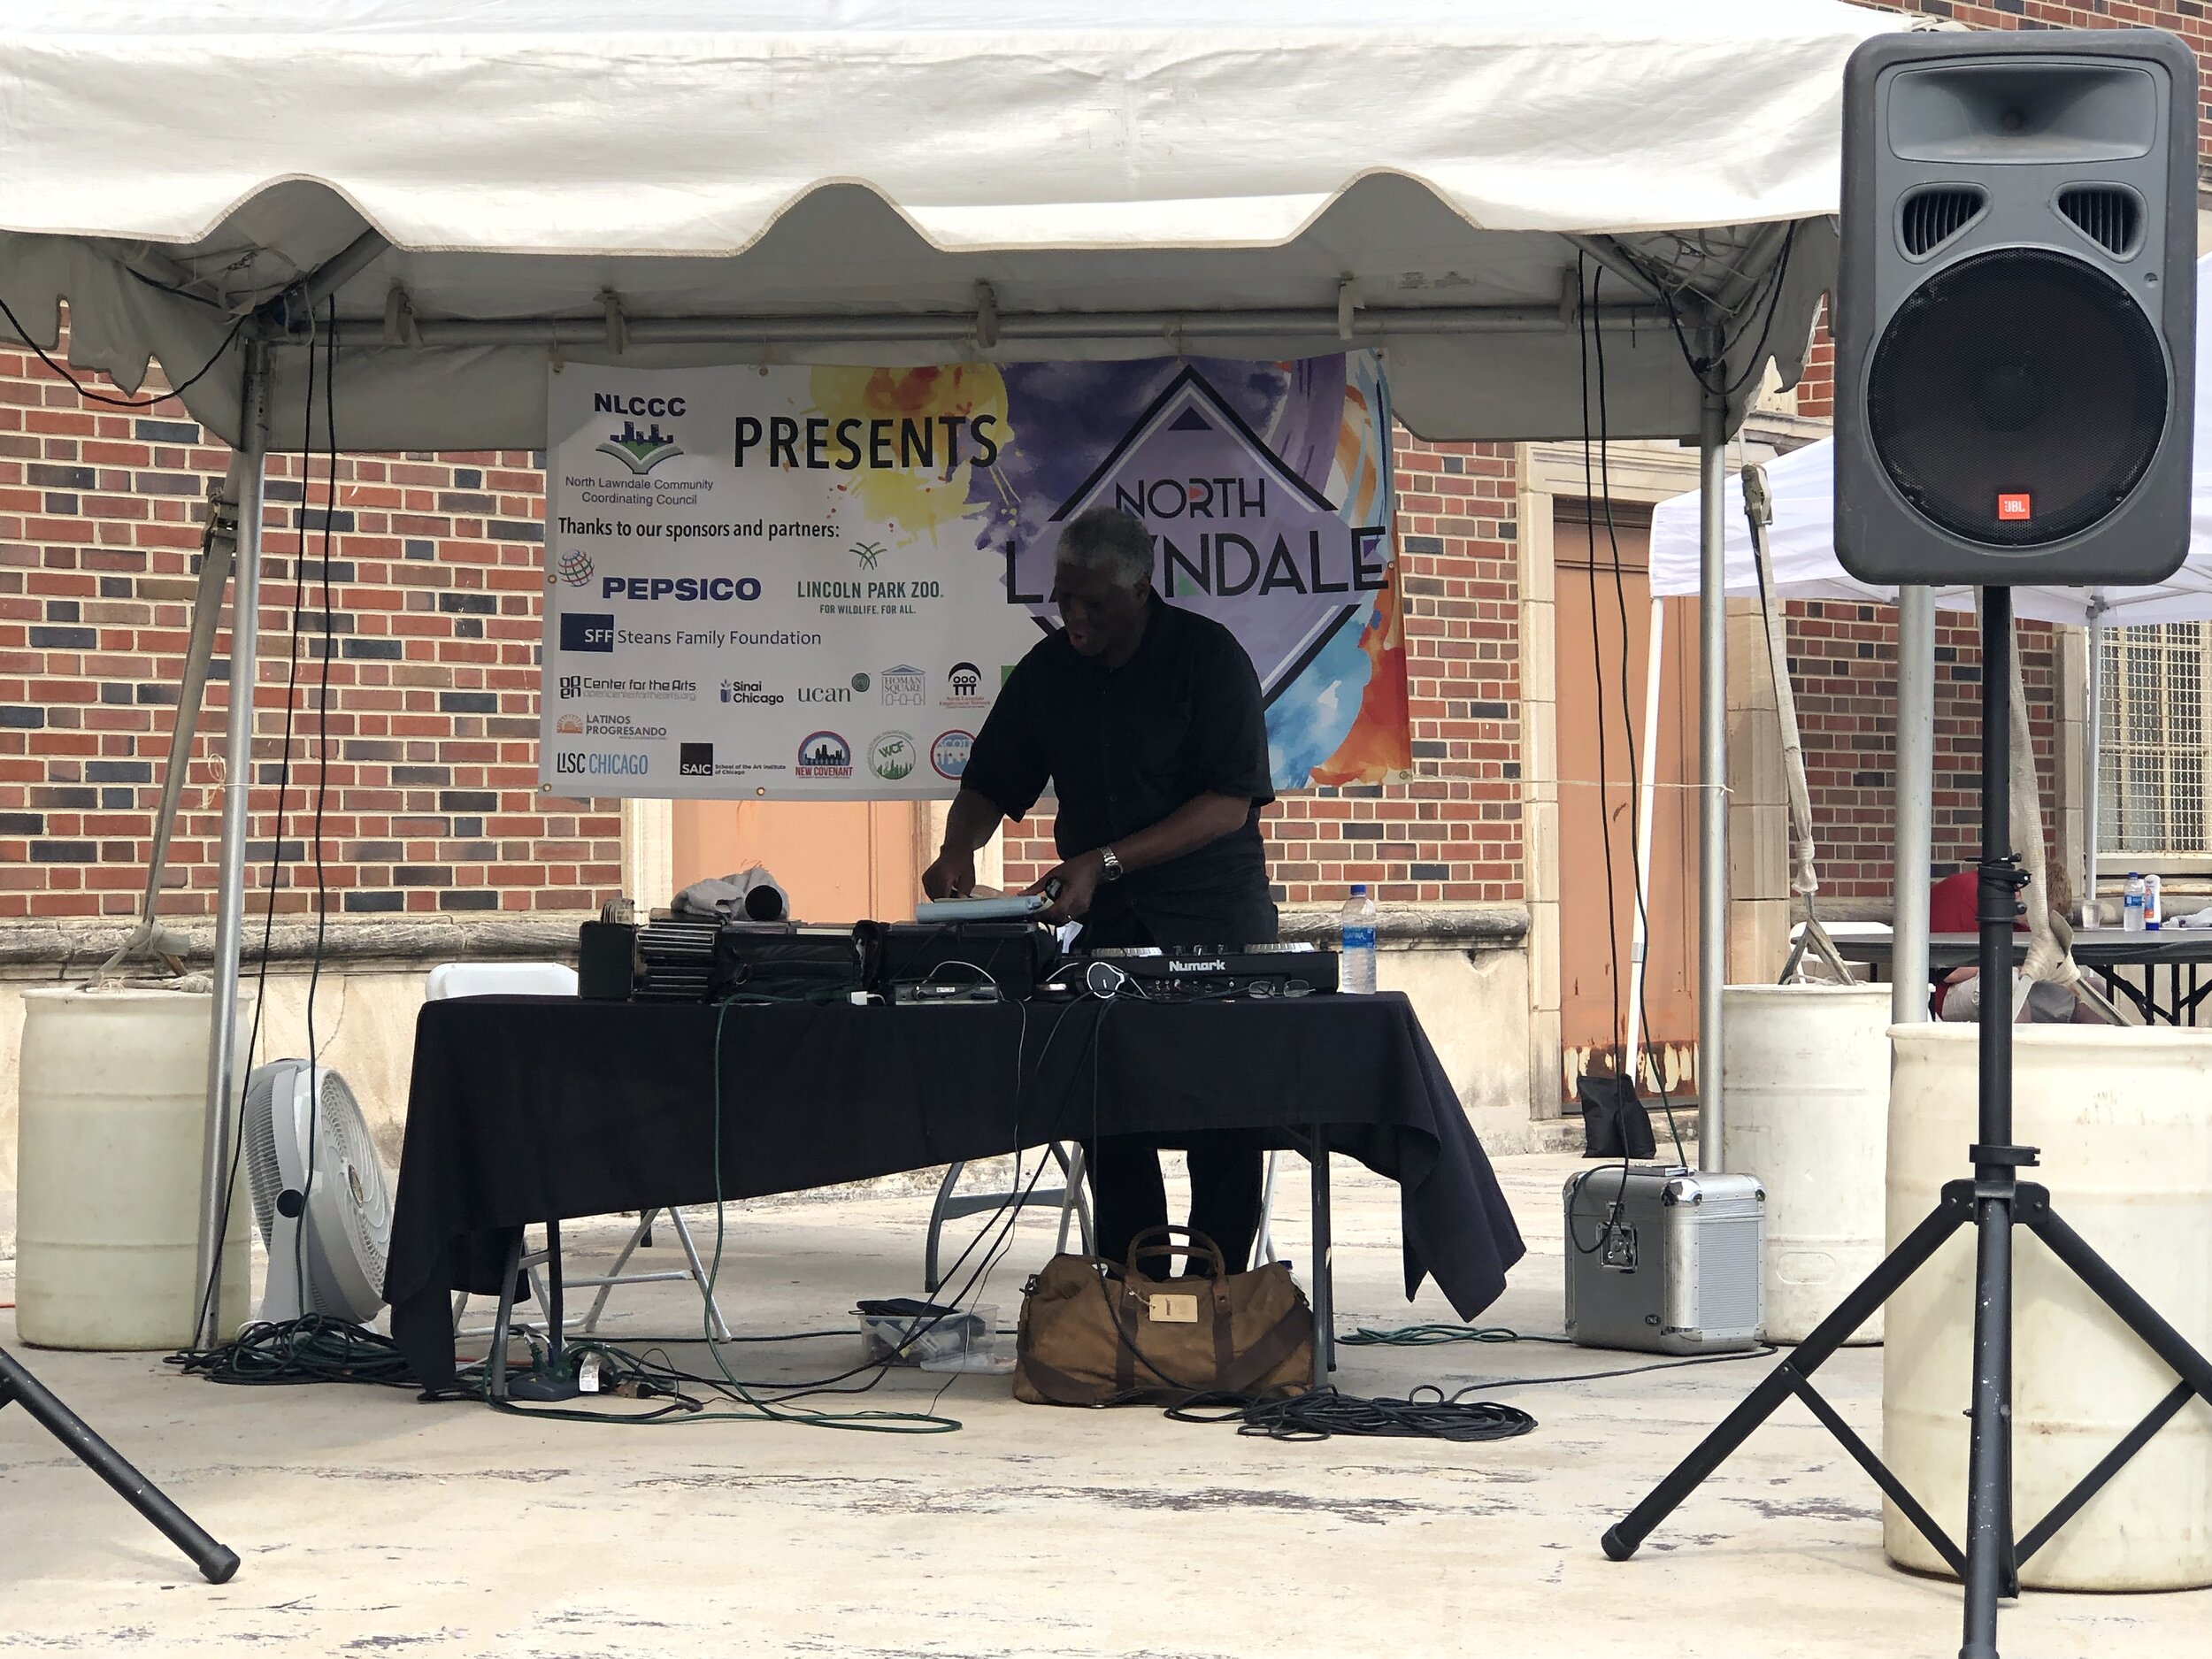 North Lawndale DJ playing music for people to dance and enjoy. In the back, there is a poster with sponsors of the North Lawndale arts festival.